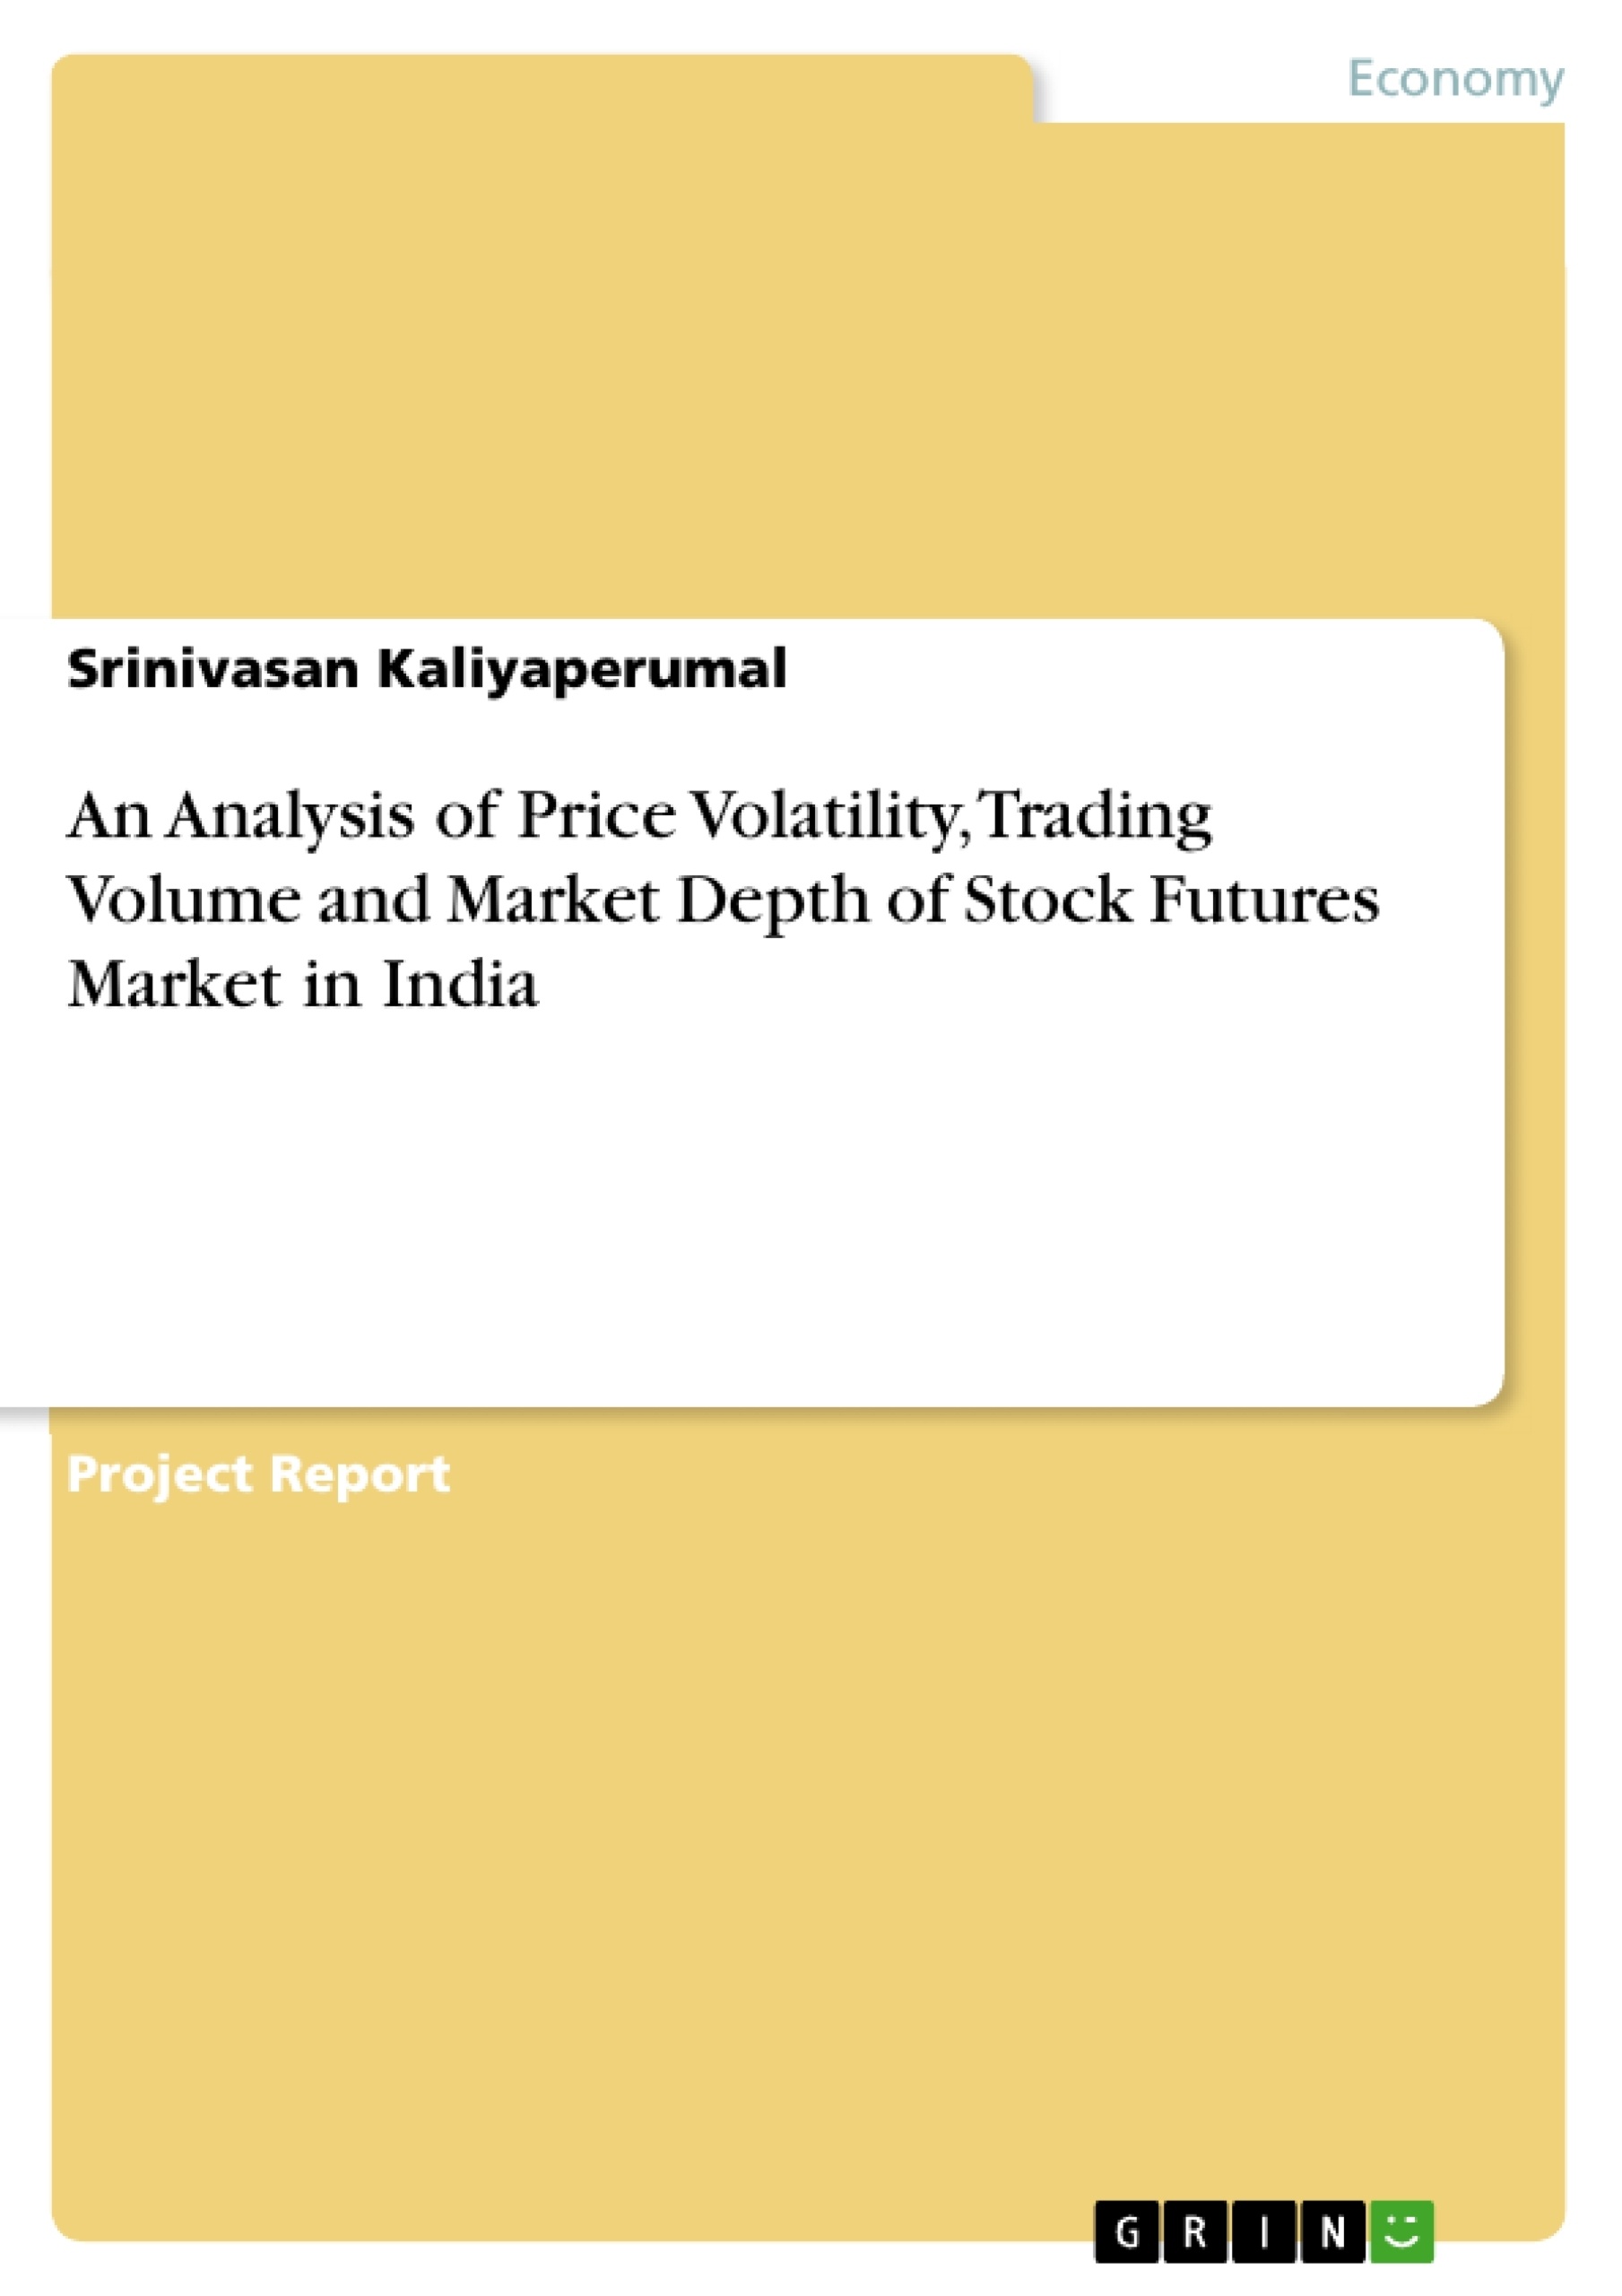 Título: An Analysis of Price Volatility, Trading Volume and Market Depth of Stock Futures Market in India